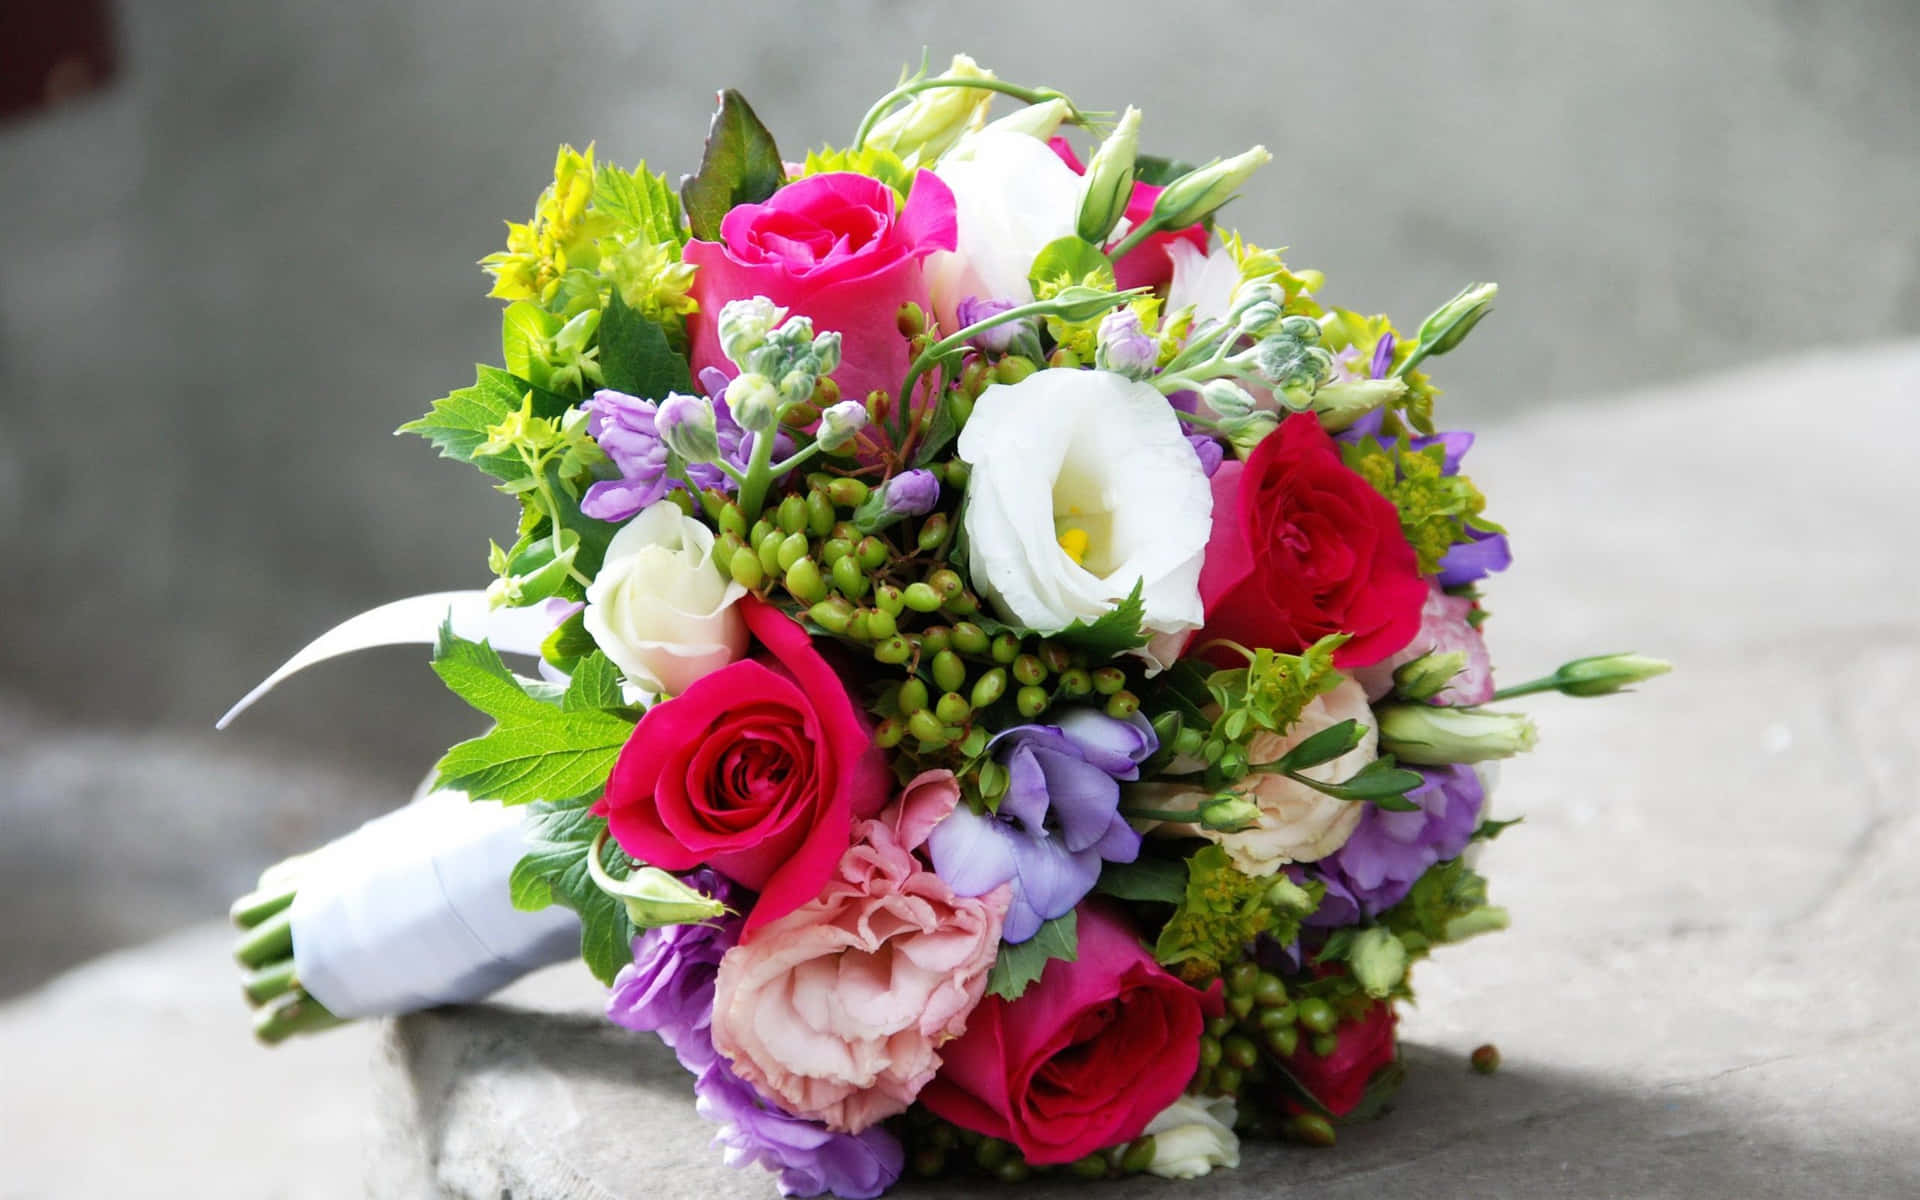 A Bouquet Of Flowers Sitting On A Stone Wall